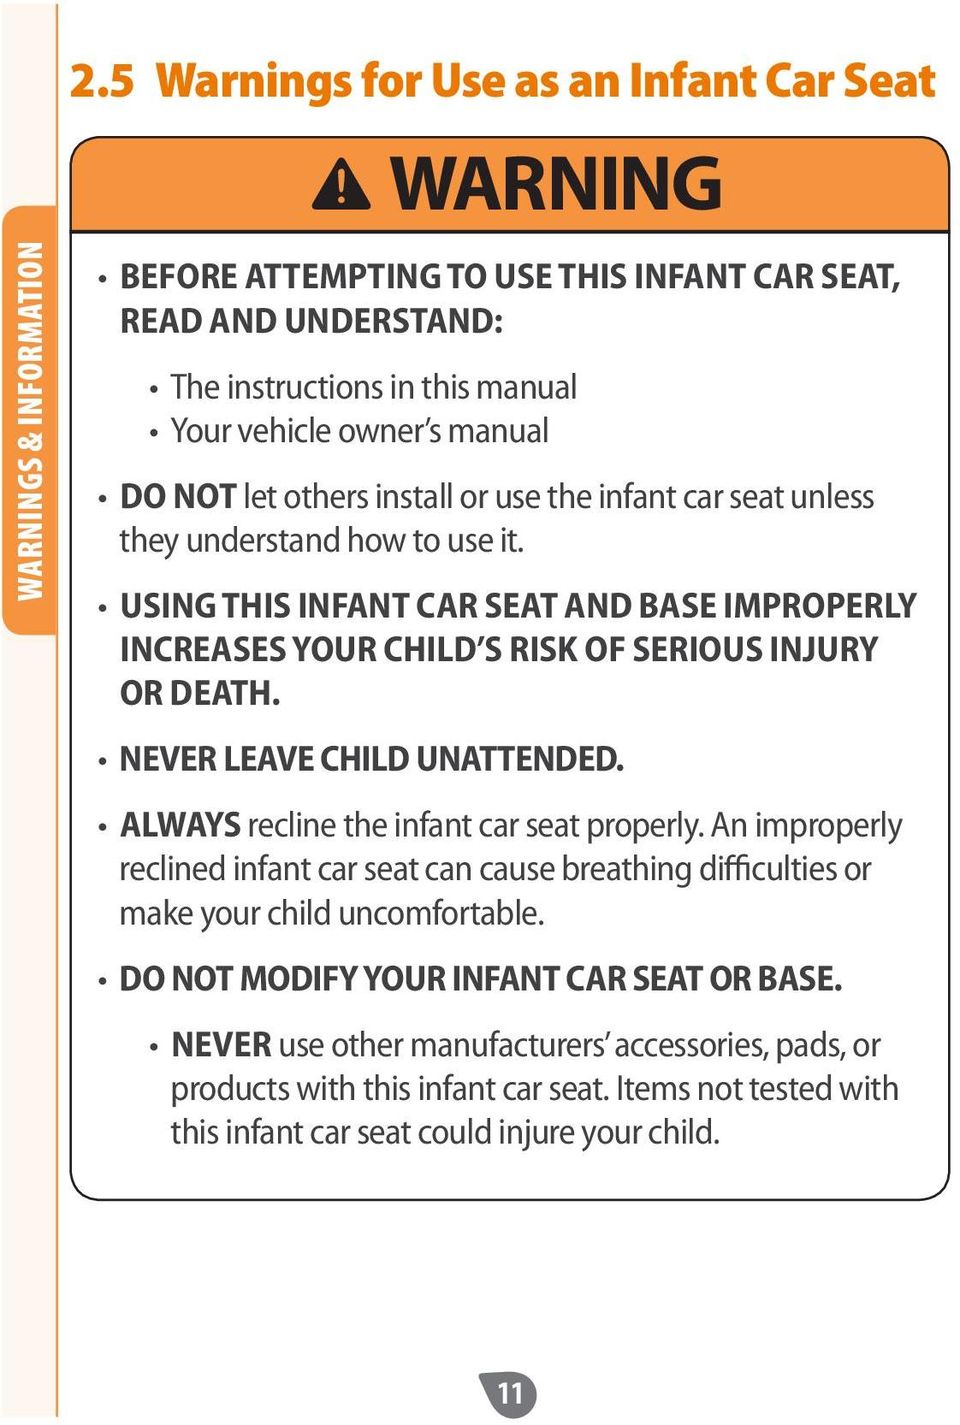 install or use the infant car seat unless they understand how to use it. USING THIS INFANT CAR SEAT AND BASE IMPROPERLY INCREASES YOUR CHILD S RISK OF SERIOUS INJURY OR DEATH.